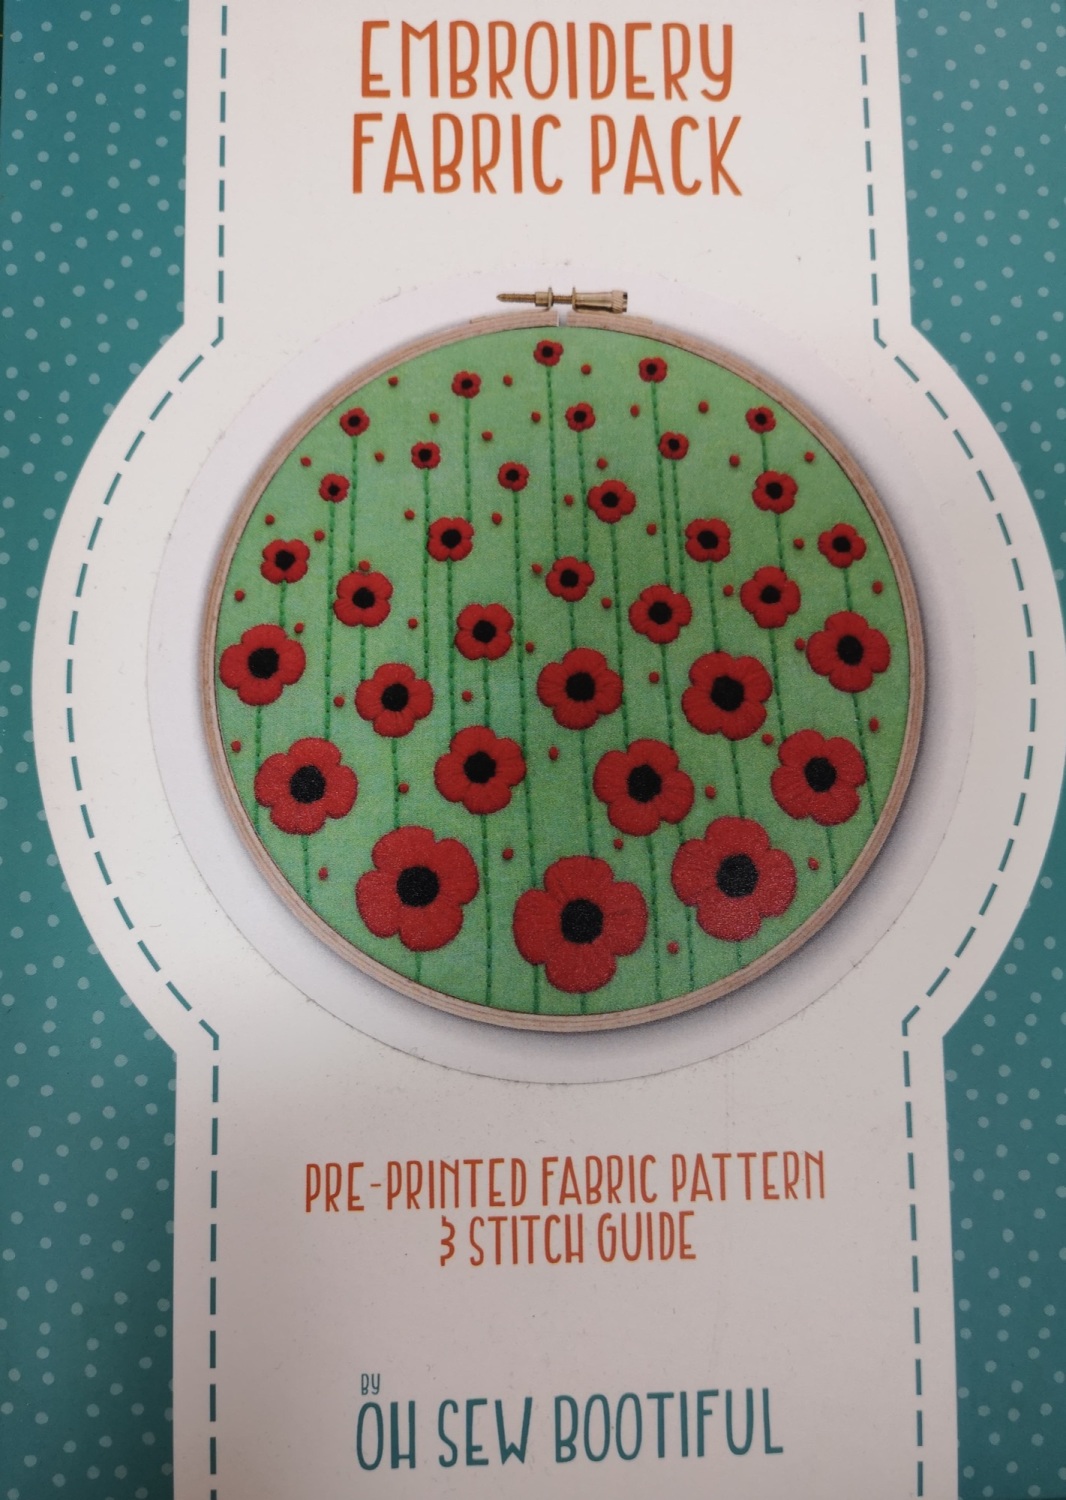 embroidery fabric pack by Oh Sew Bootiful - poppies